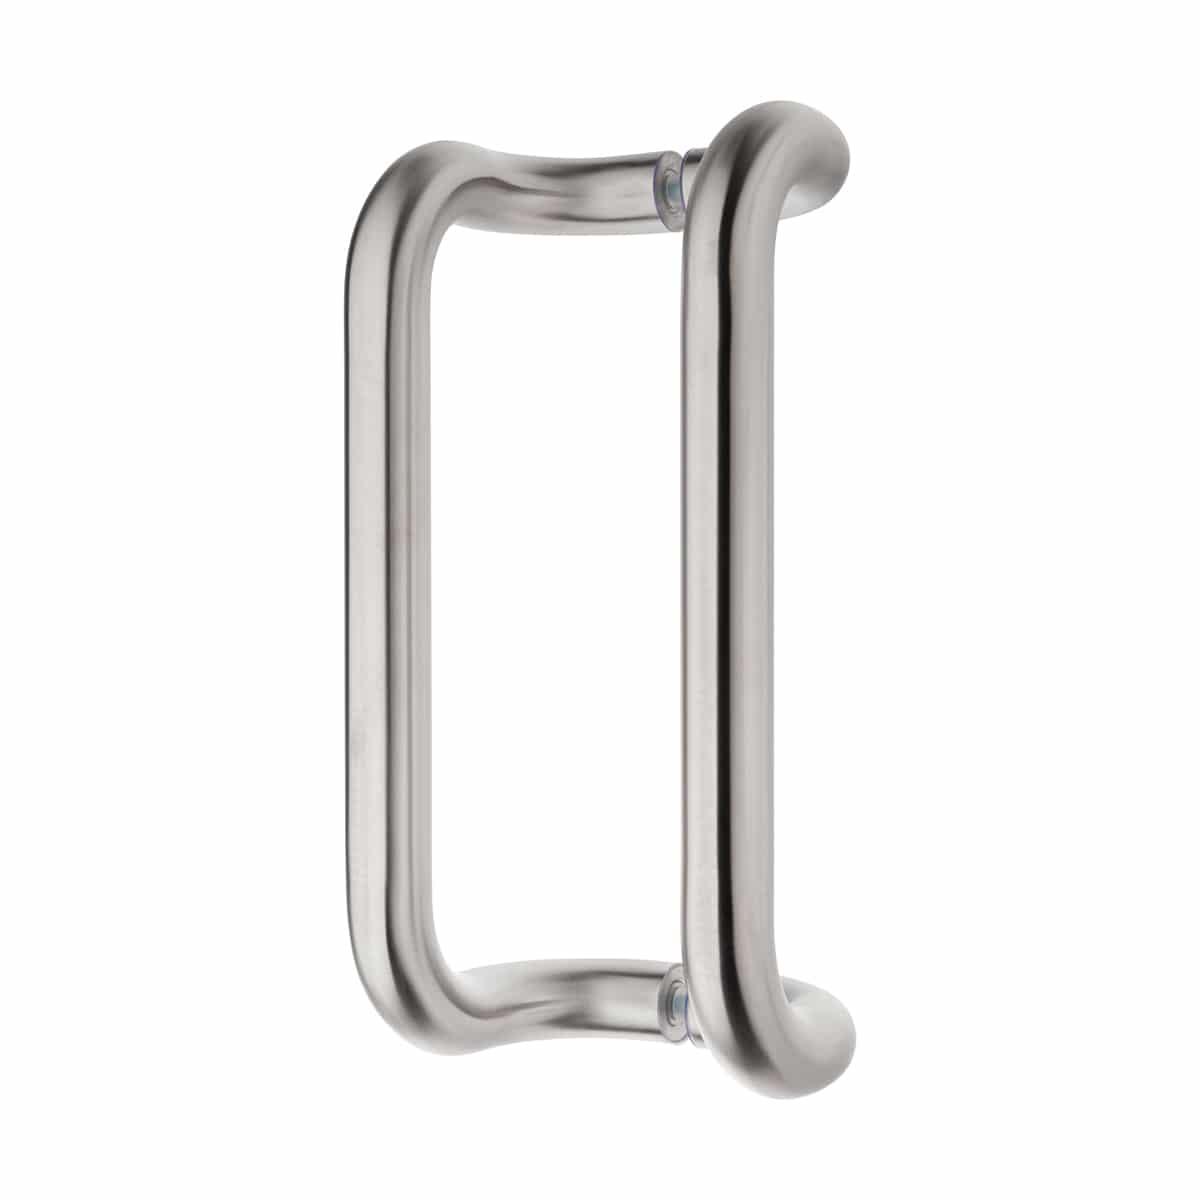 High Quality Stainless Steel Pull Handle Back To Back Fixing J105